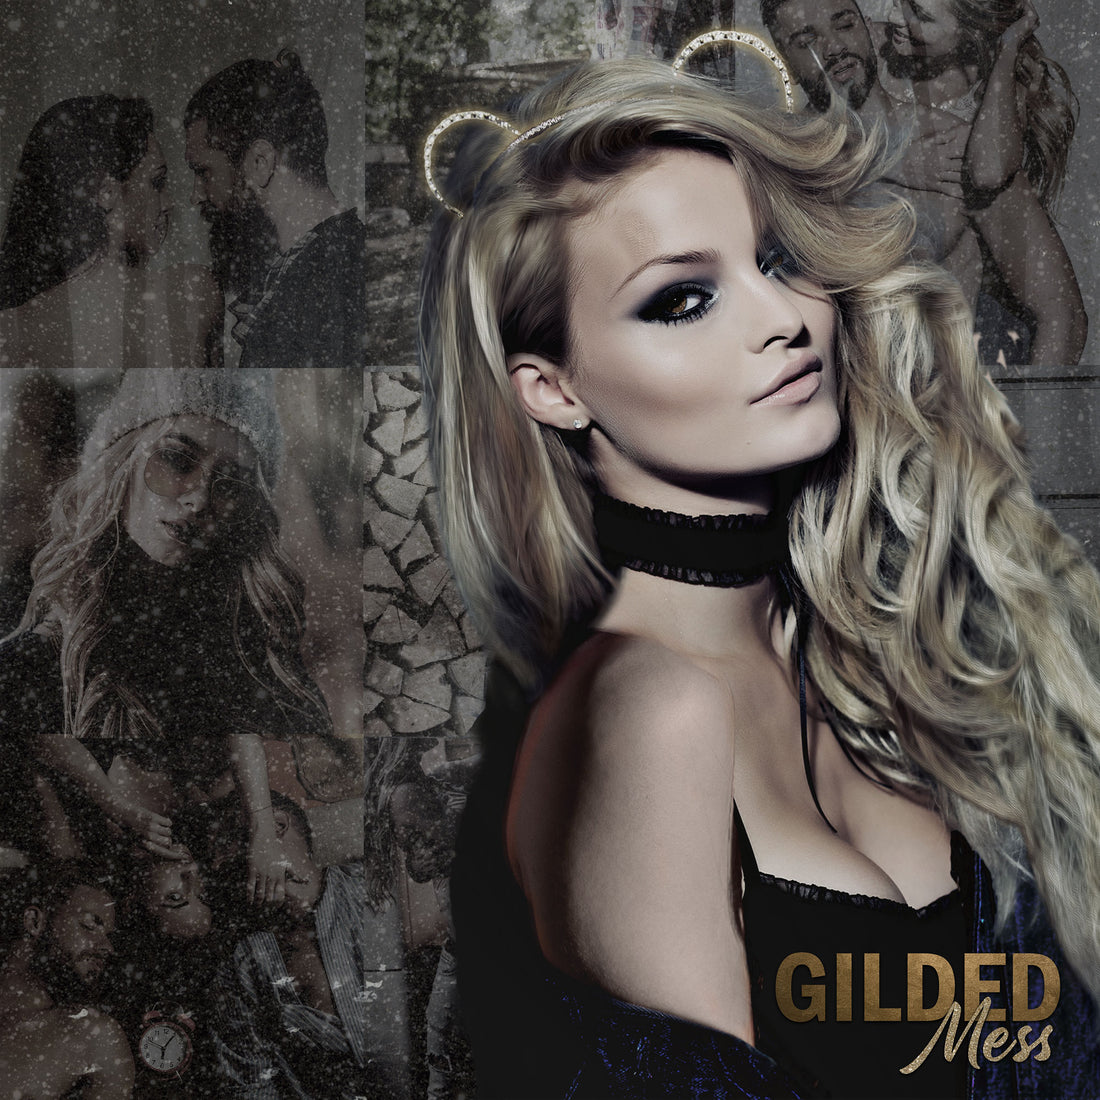 OUT NOW: GILDED MESS